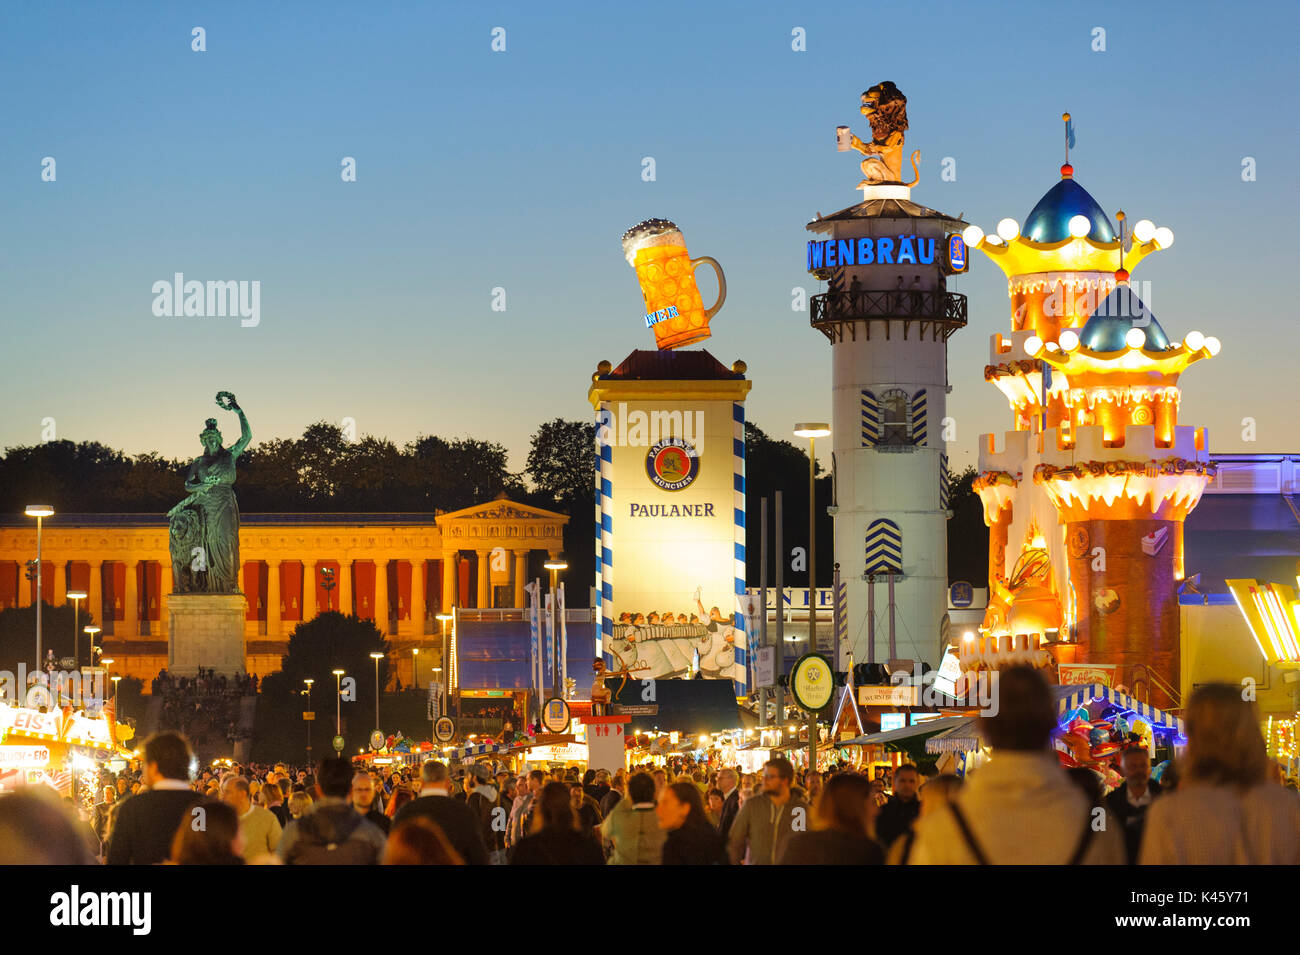 Oktoberfest in Munich is the biggest beer festival of the world with many tourists walking through huge beer tents, carousels, and amusement huts Stock Photo